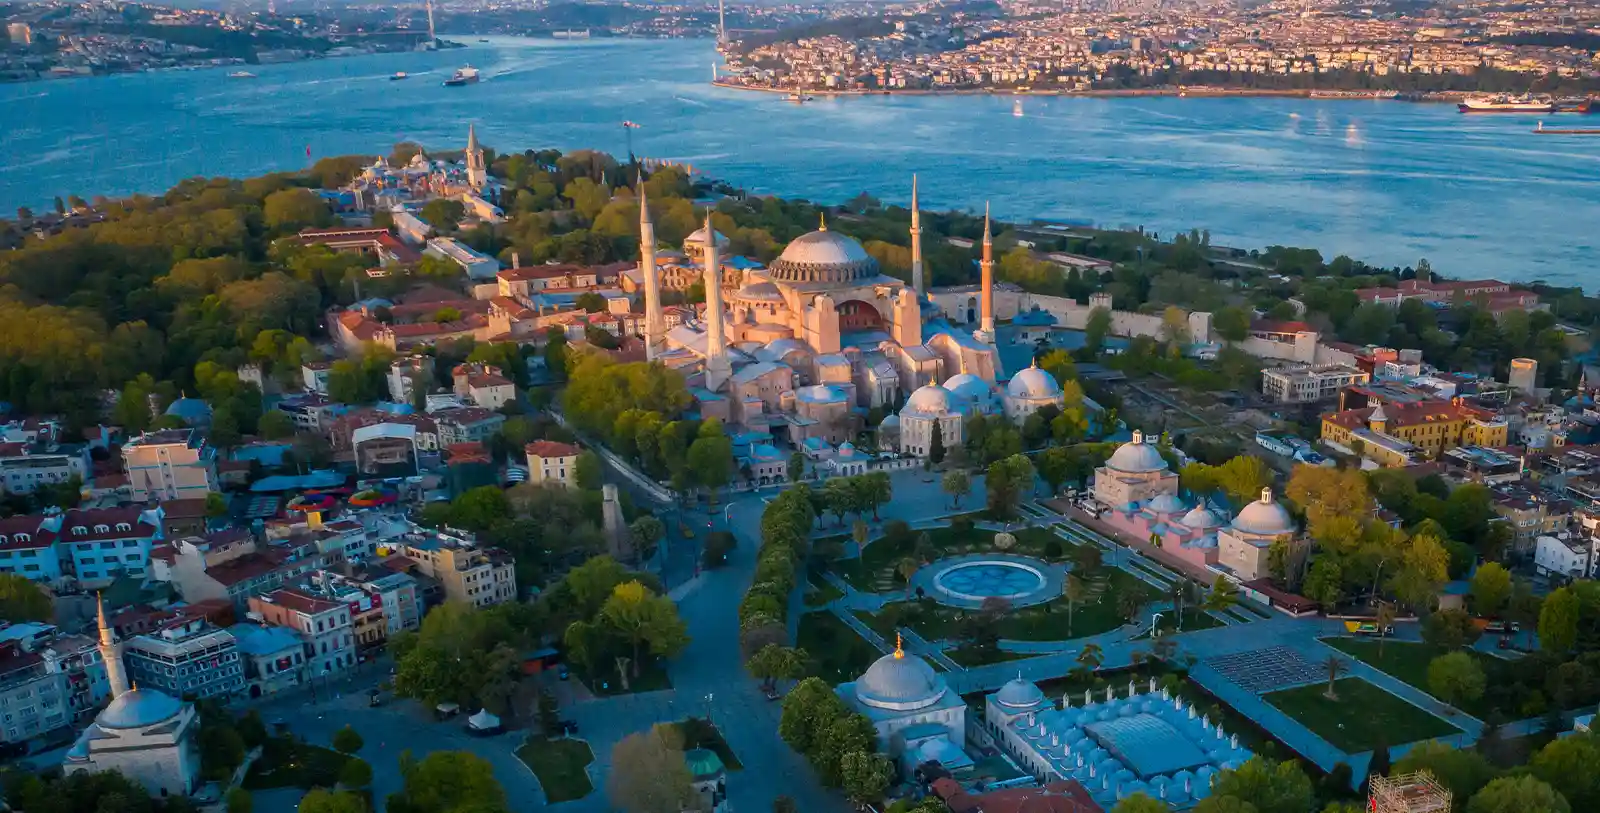 The historic peninsula of Istanbul from aerial view. Turkey has a very rich culture and history.